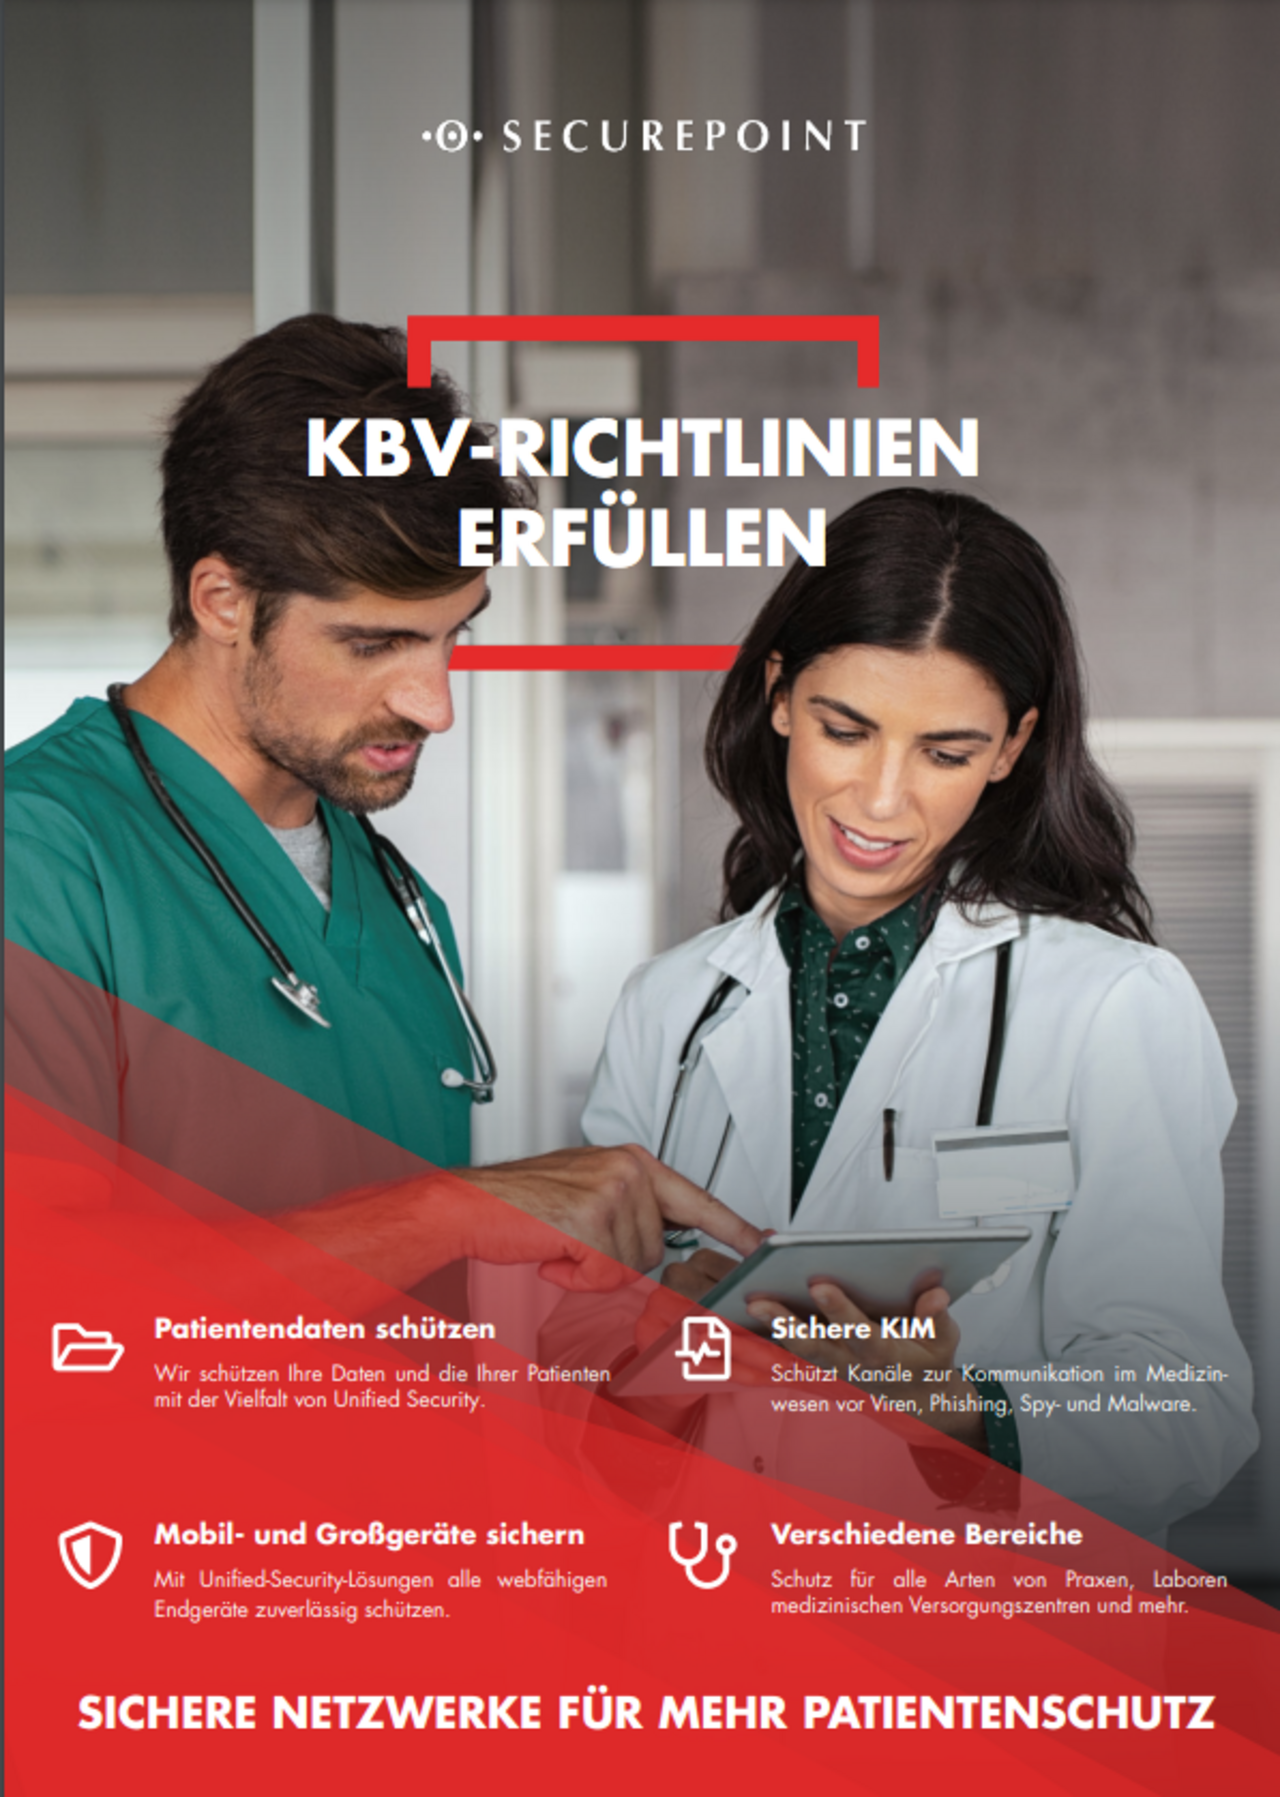 Cover image of the Healthcare brochure